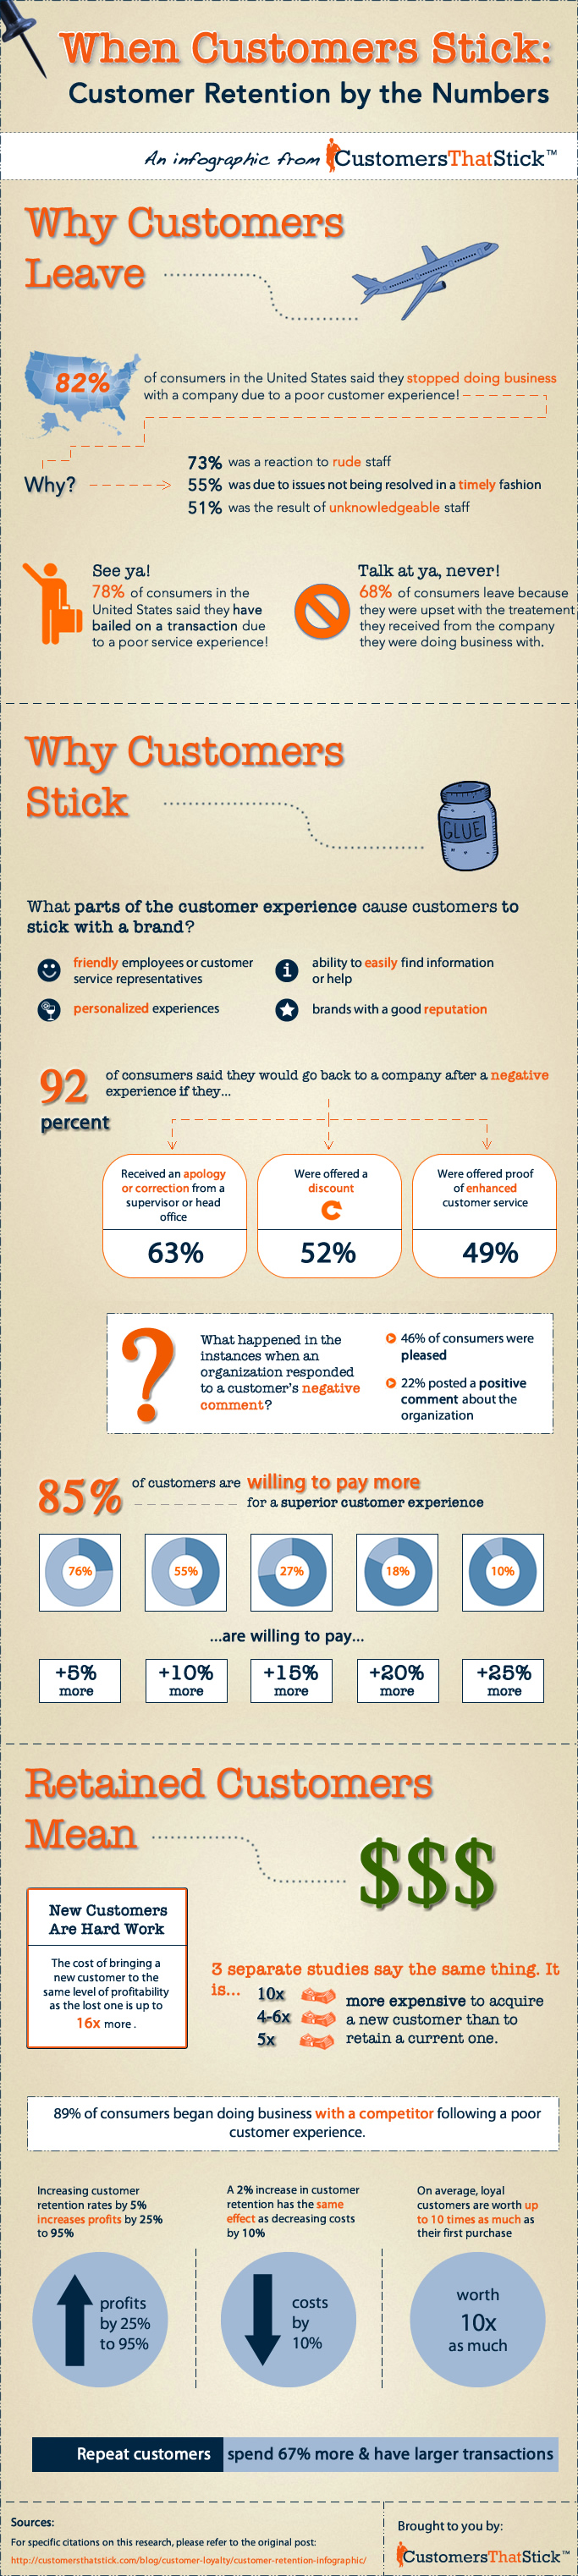 When Customers Stick: Customer Retention by the Numbers